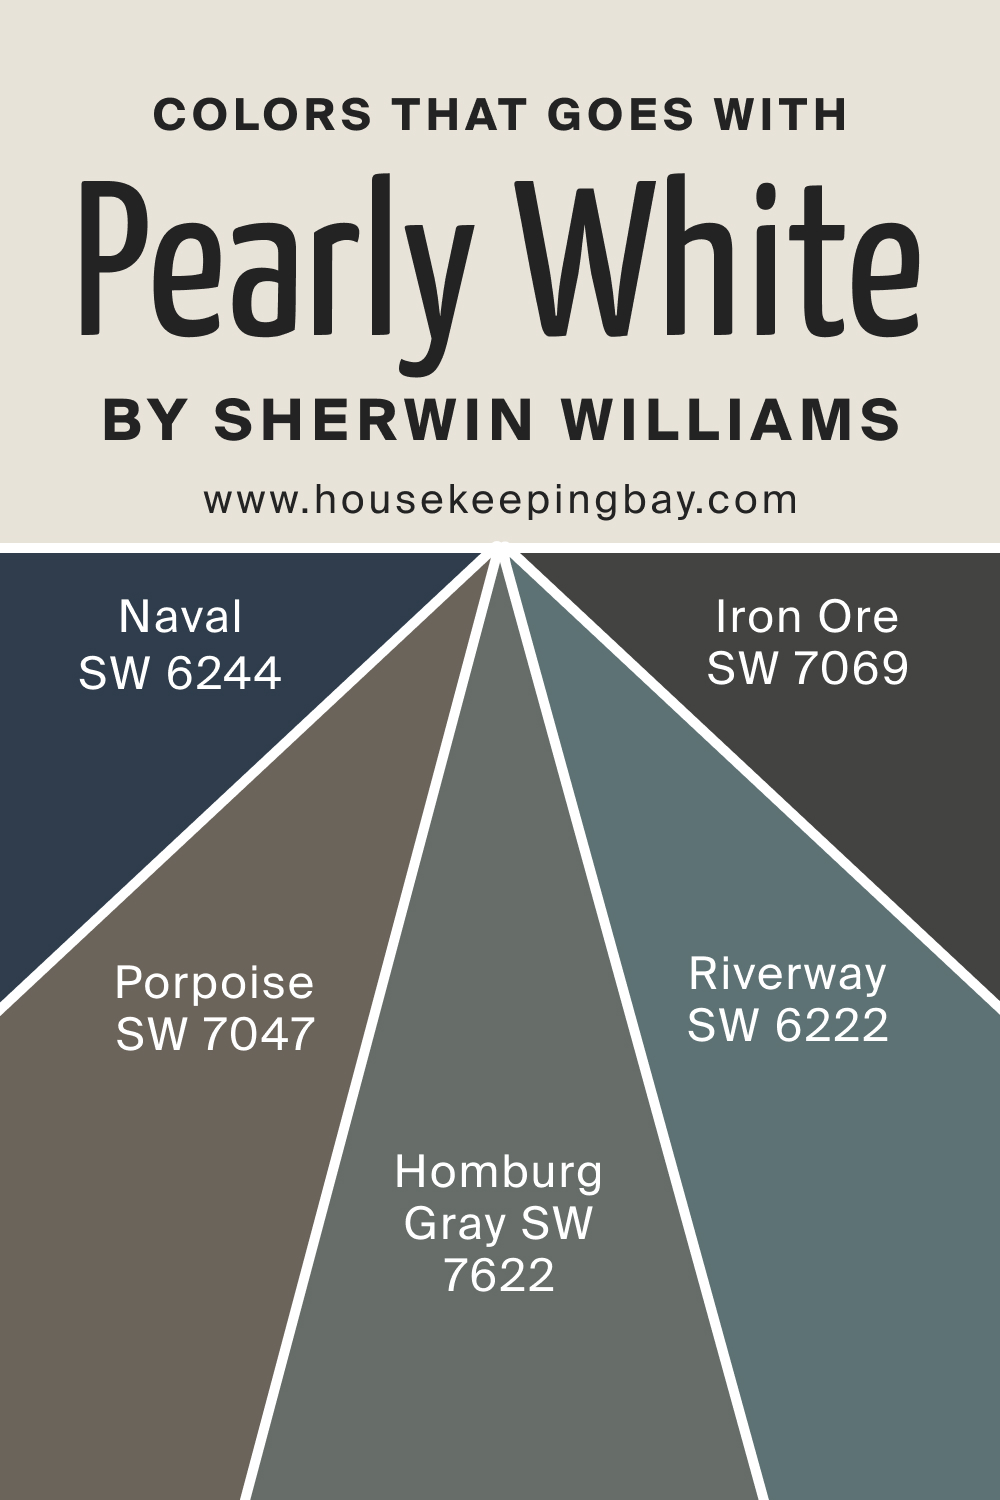 Colors that goes with SW Pearly White by Sherwin Williams